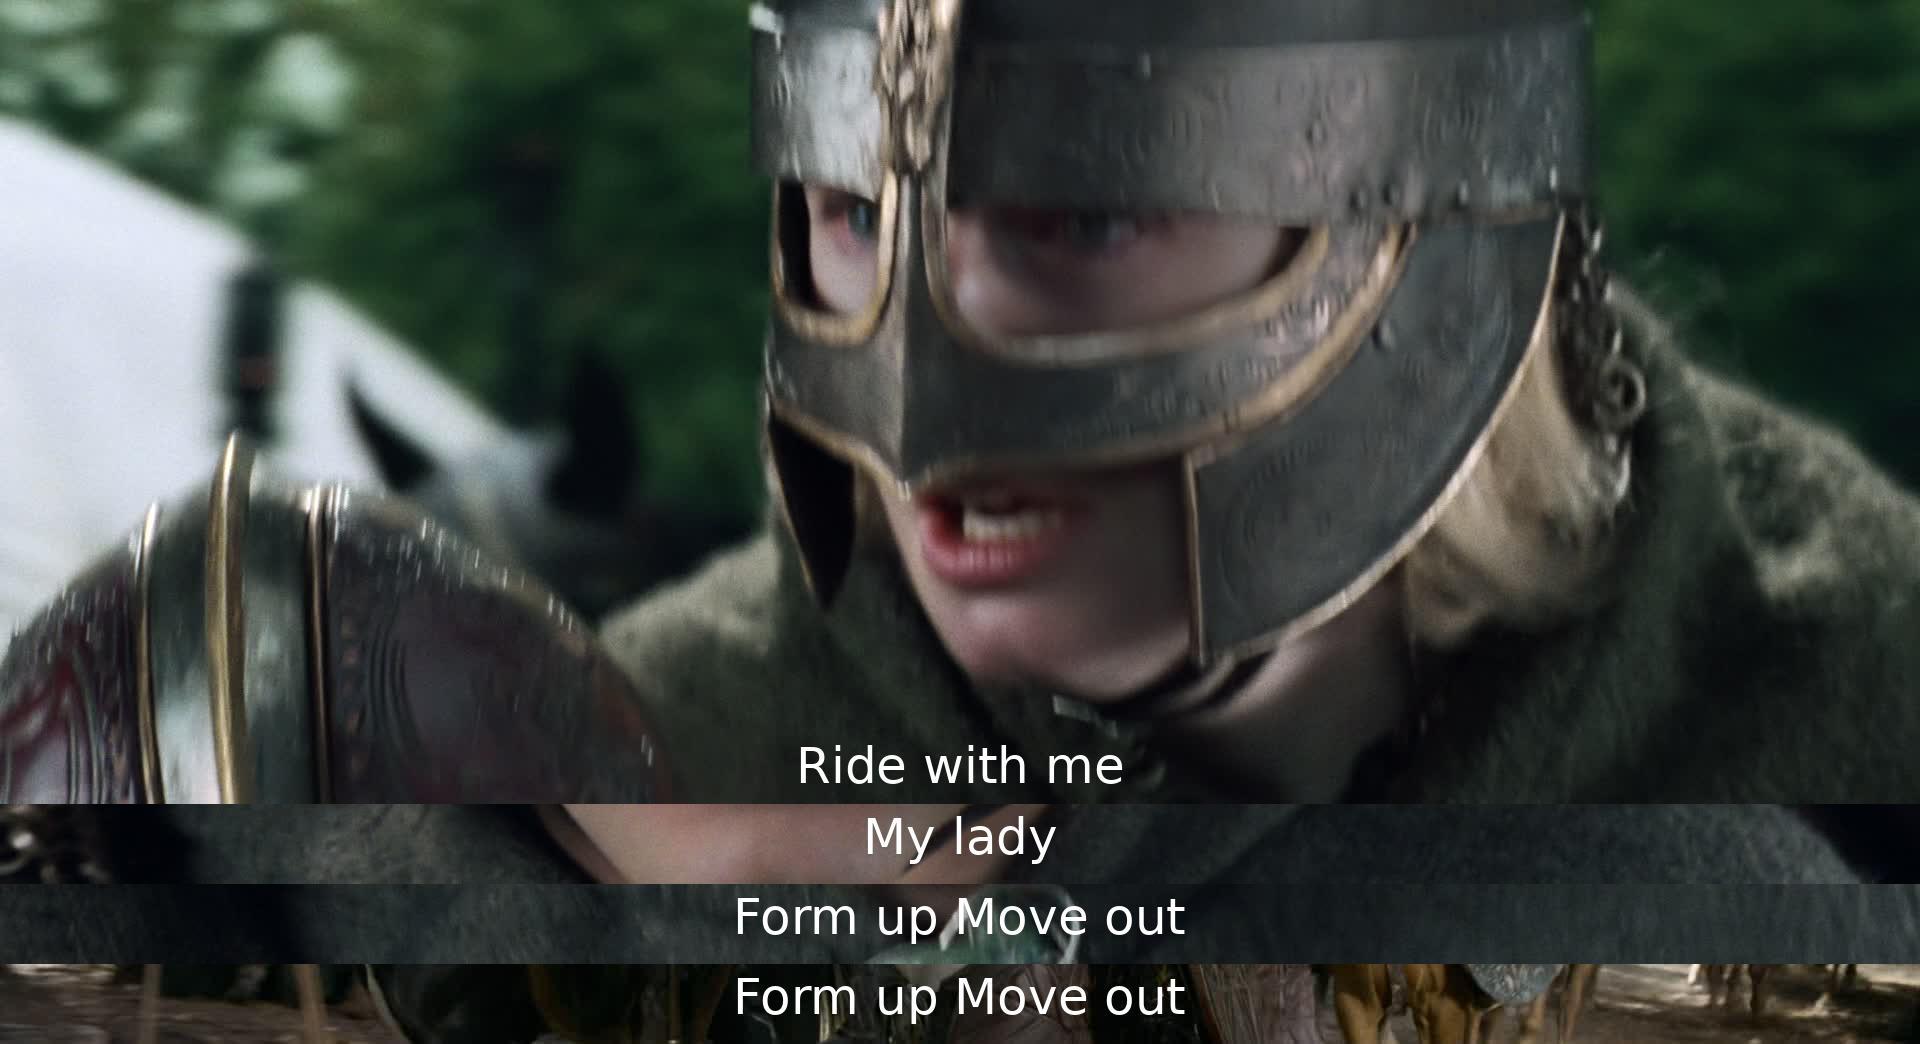 A character invites a lady to ride with them, and then commands others to form up and move out. The dialogue suggests a sense of urgency and readiness for action.